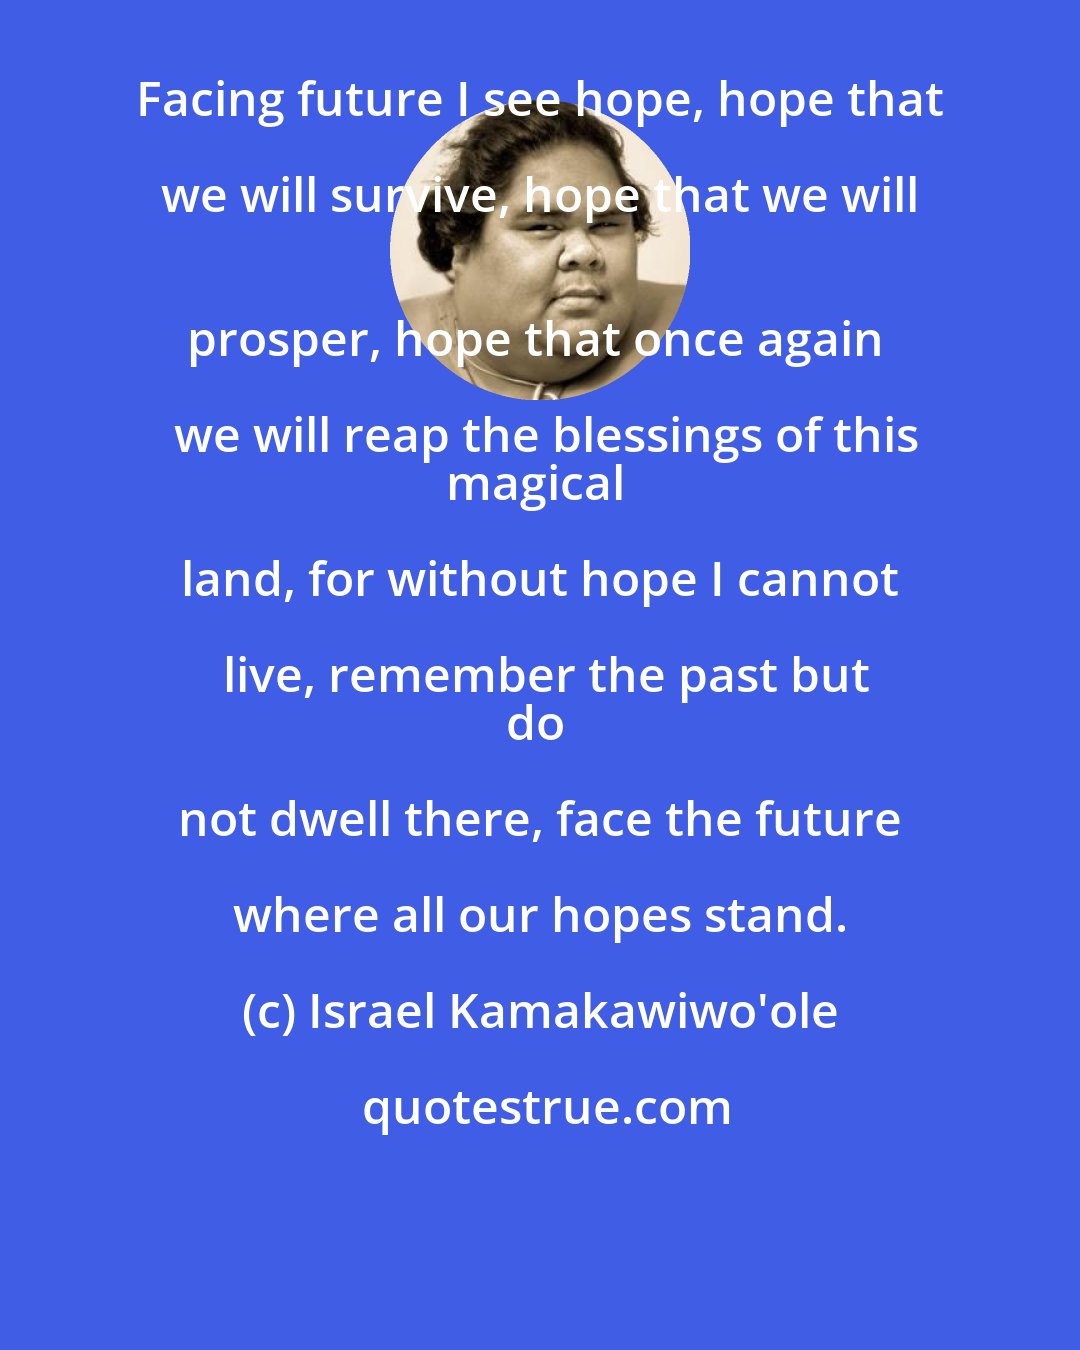 Israel Kamakawiwo'ole: Facing future I see hope, hope that we will survive, hope that we will 
prosper, hope that once again we will reap the blessings of this
magical land, for without hope I cannot live, remember the past but
do not dwell there, face the future where all our hopes stand.